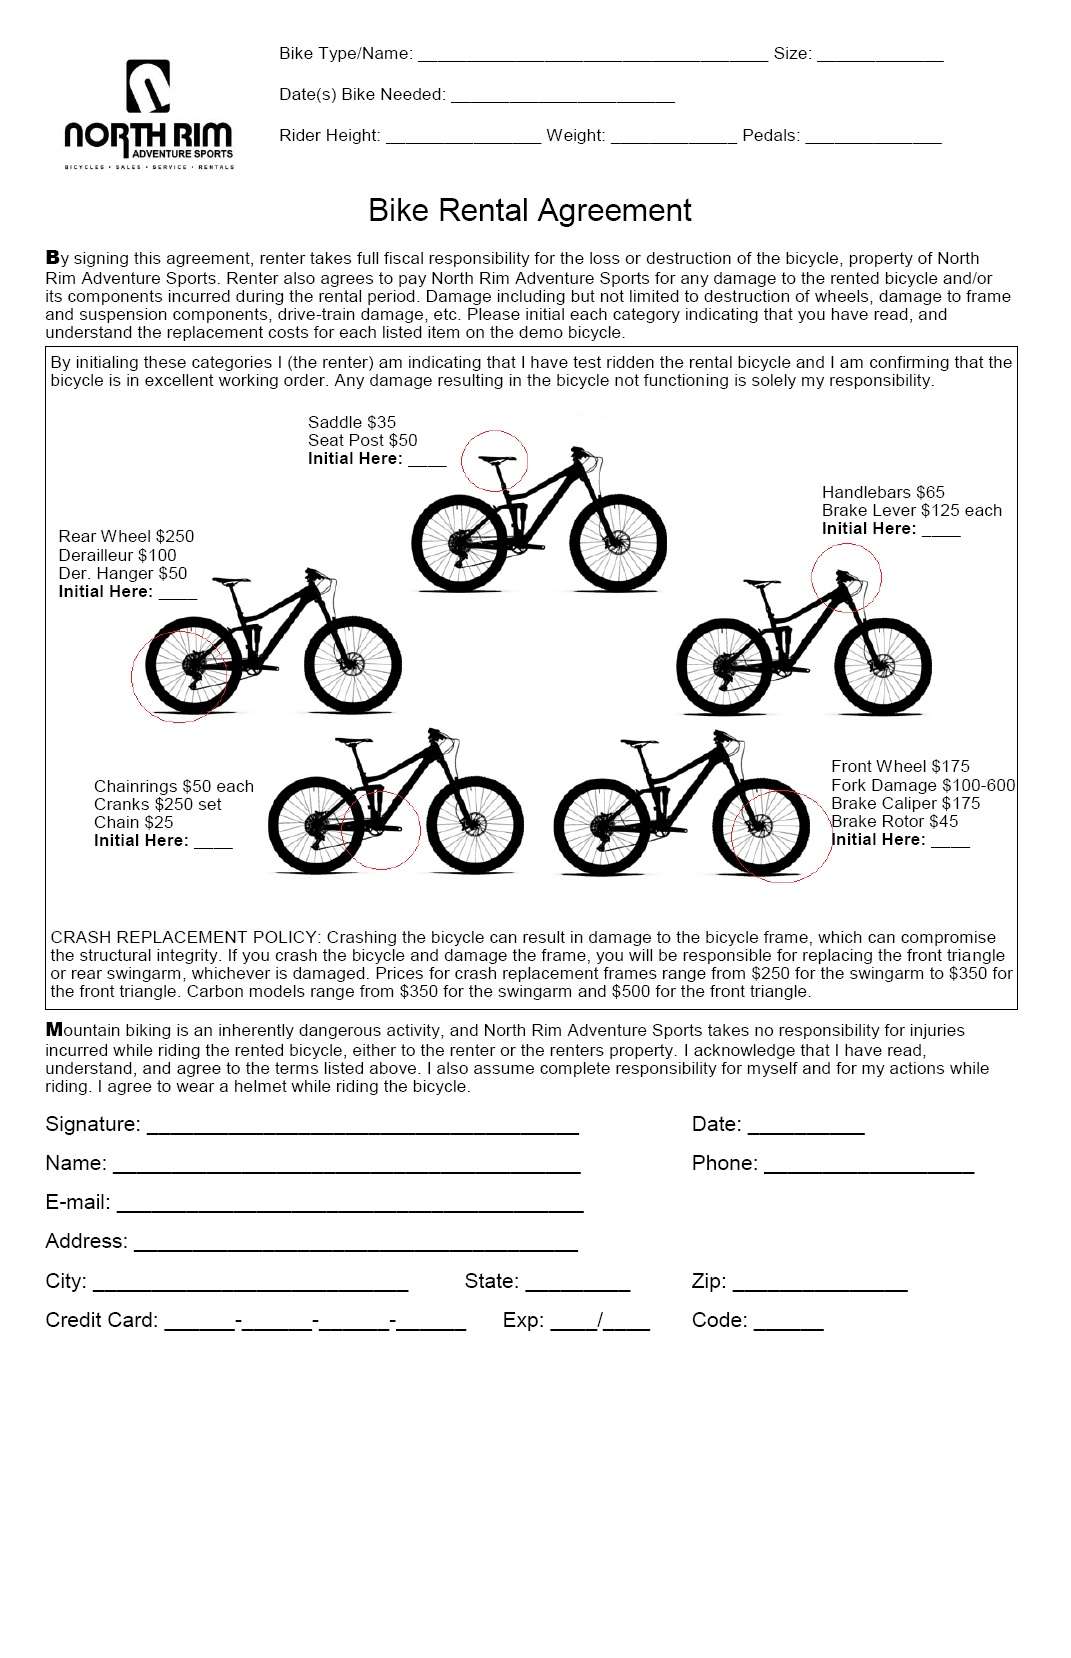 Rental Information - North Rim Adventure Sports Chico Ca Pertaining To bicycle rental agreement template